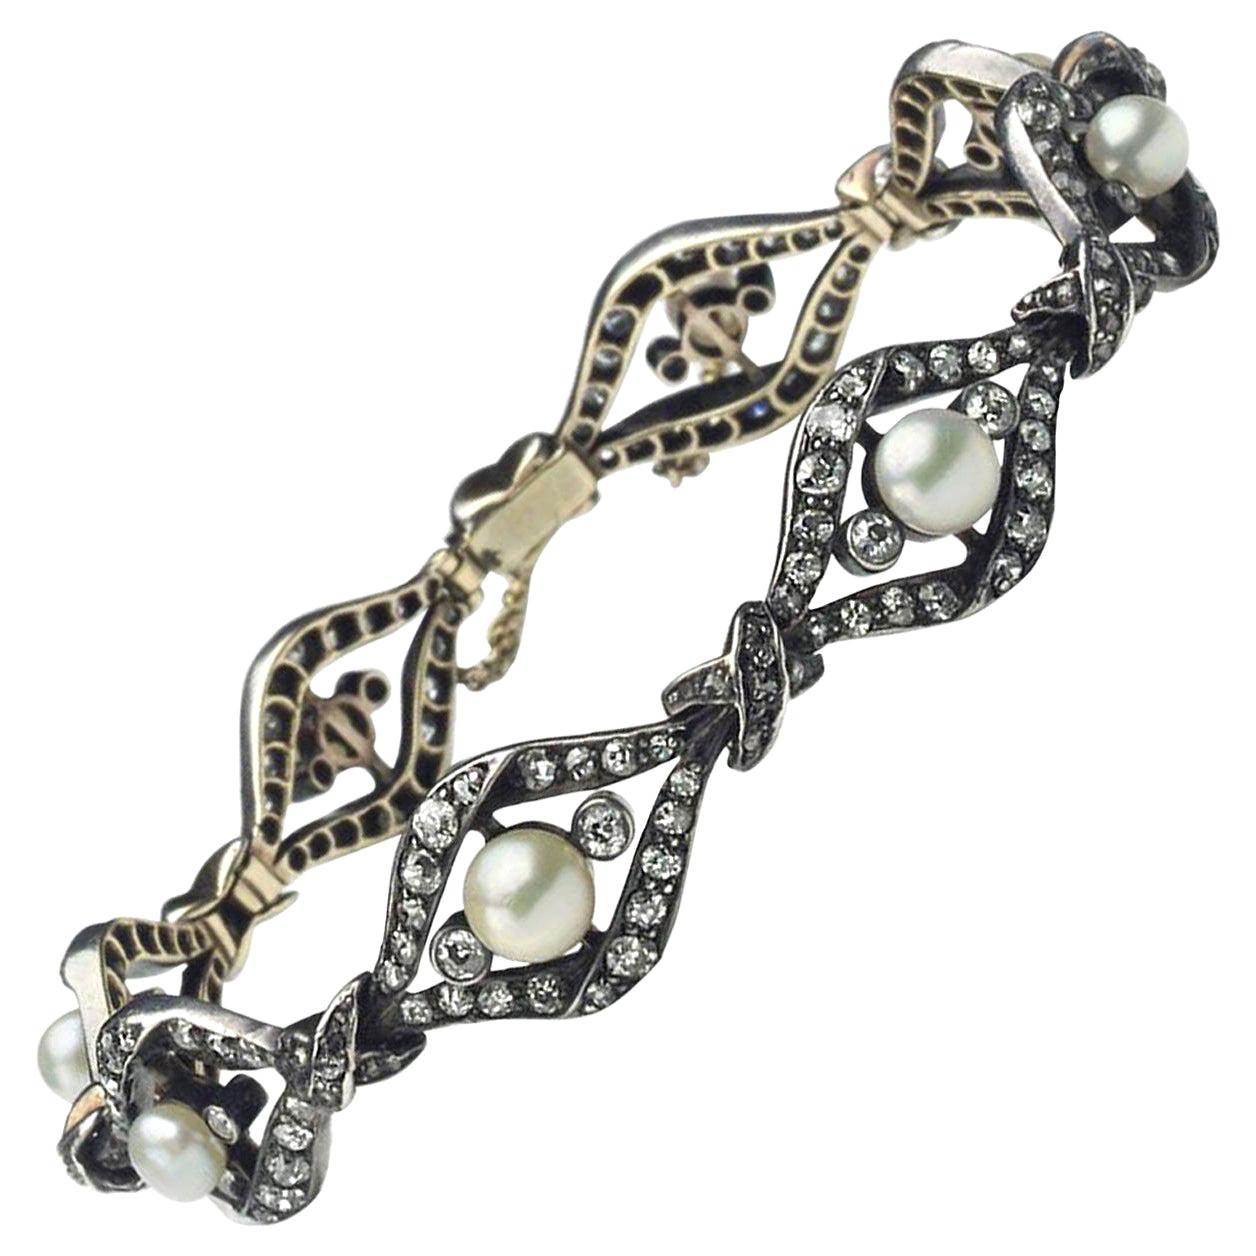 Antique Pearl, Diamond and Silver Upon Gold Bracelet, circa 1890